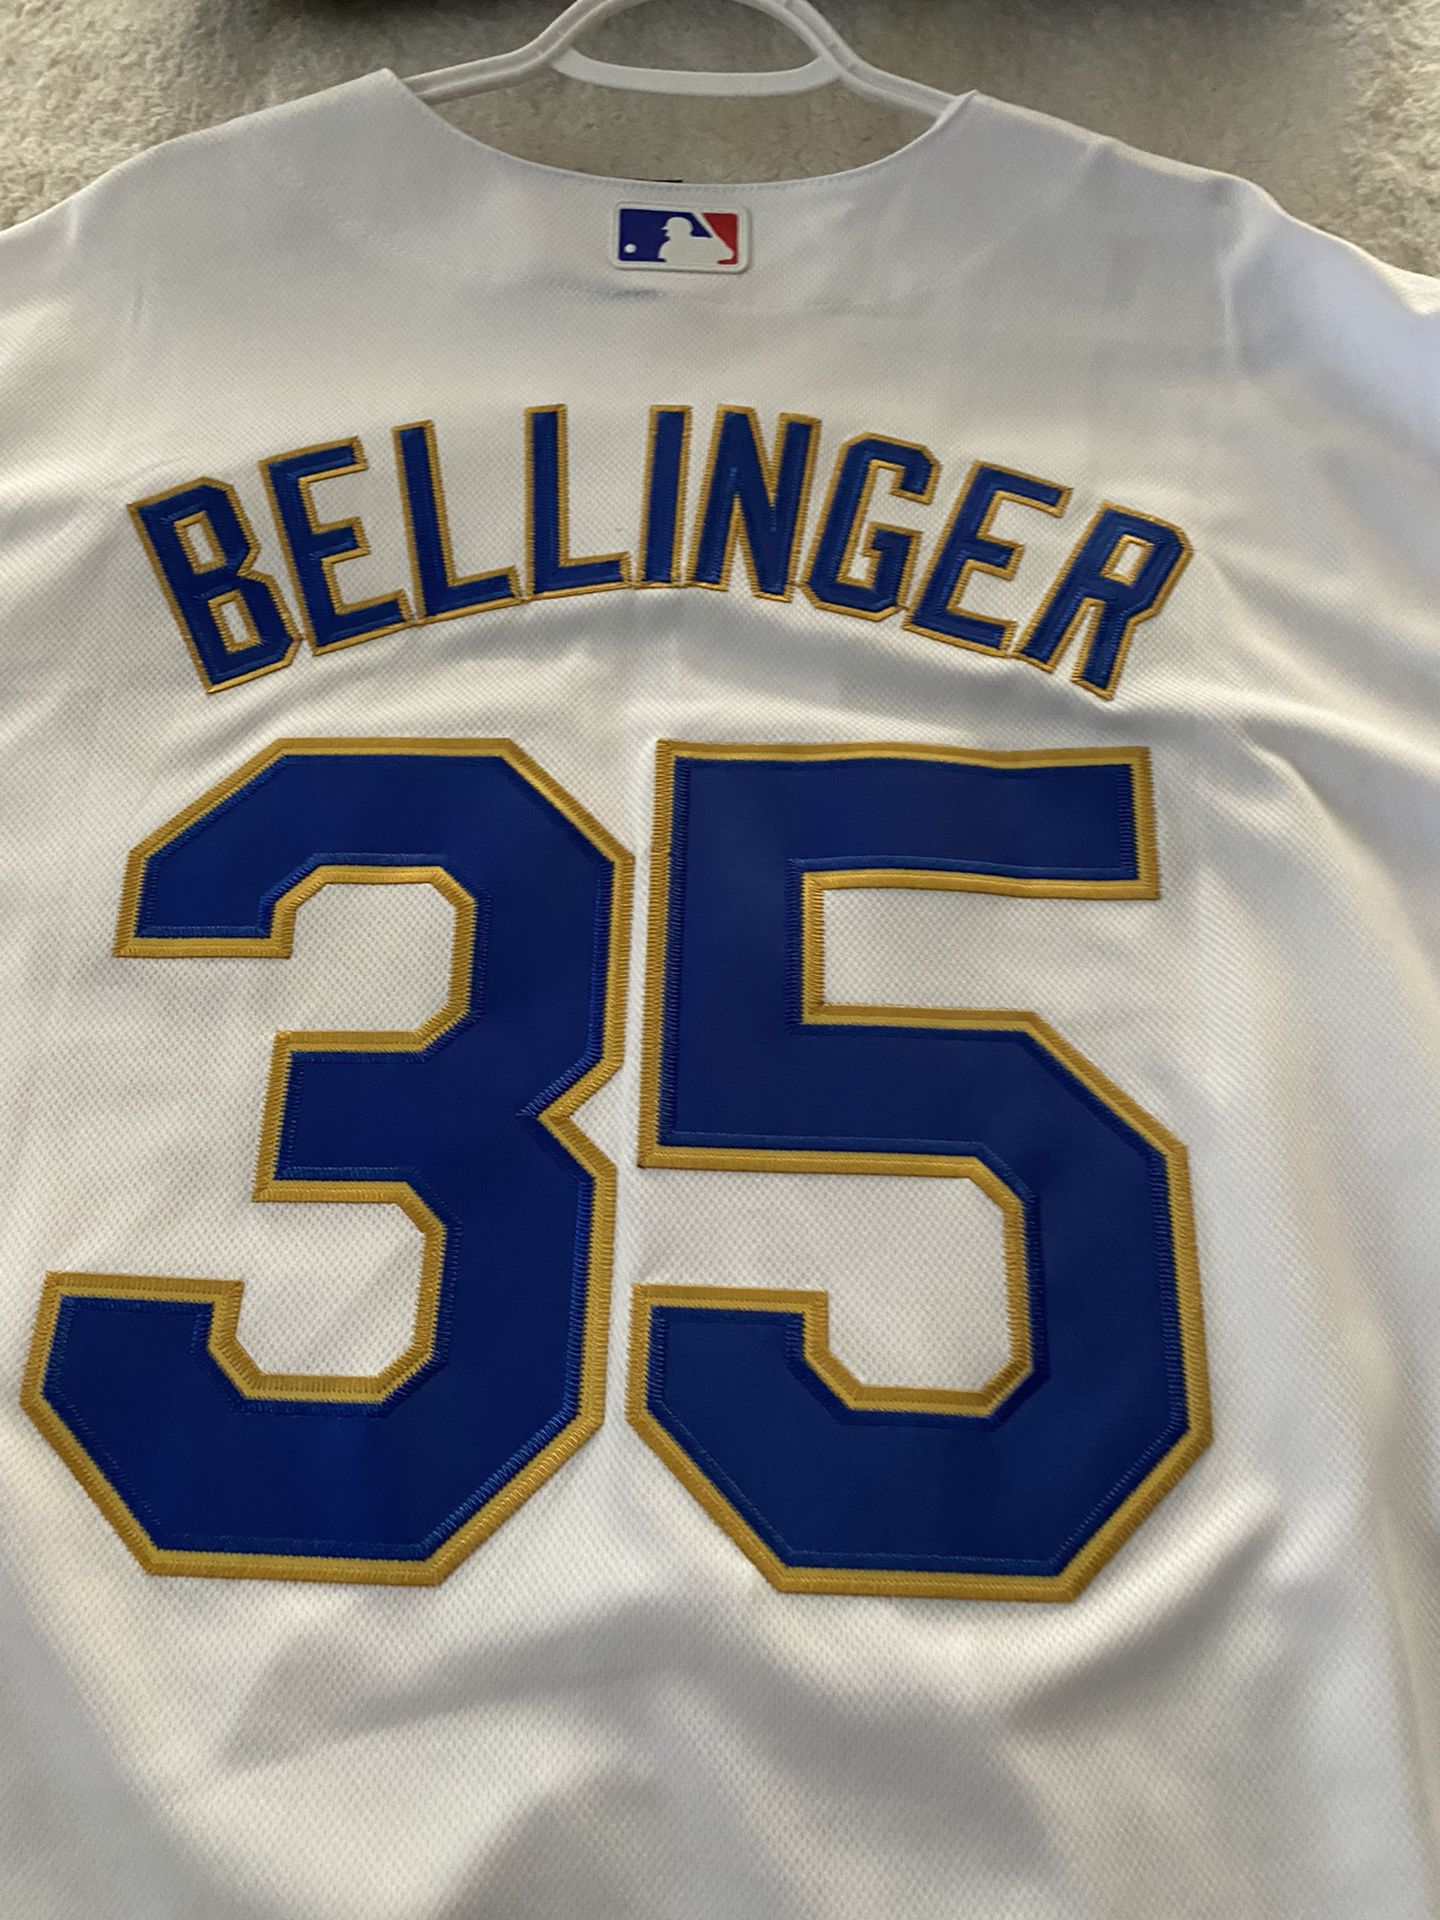 Los Angeles Chargers Baseball Jersey for Sale in Whittier, CA - OfferUp